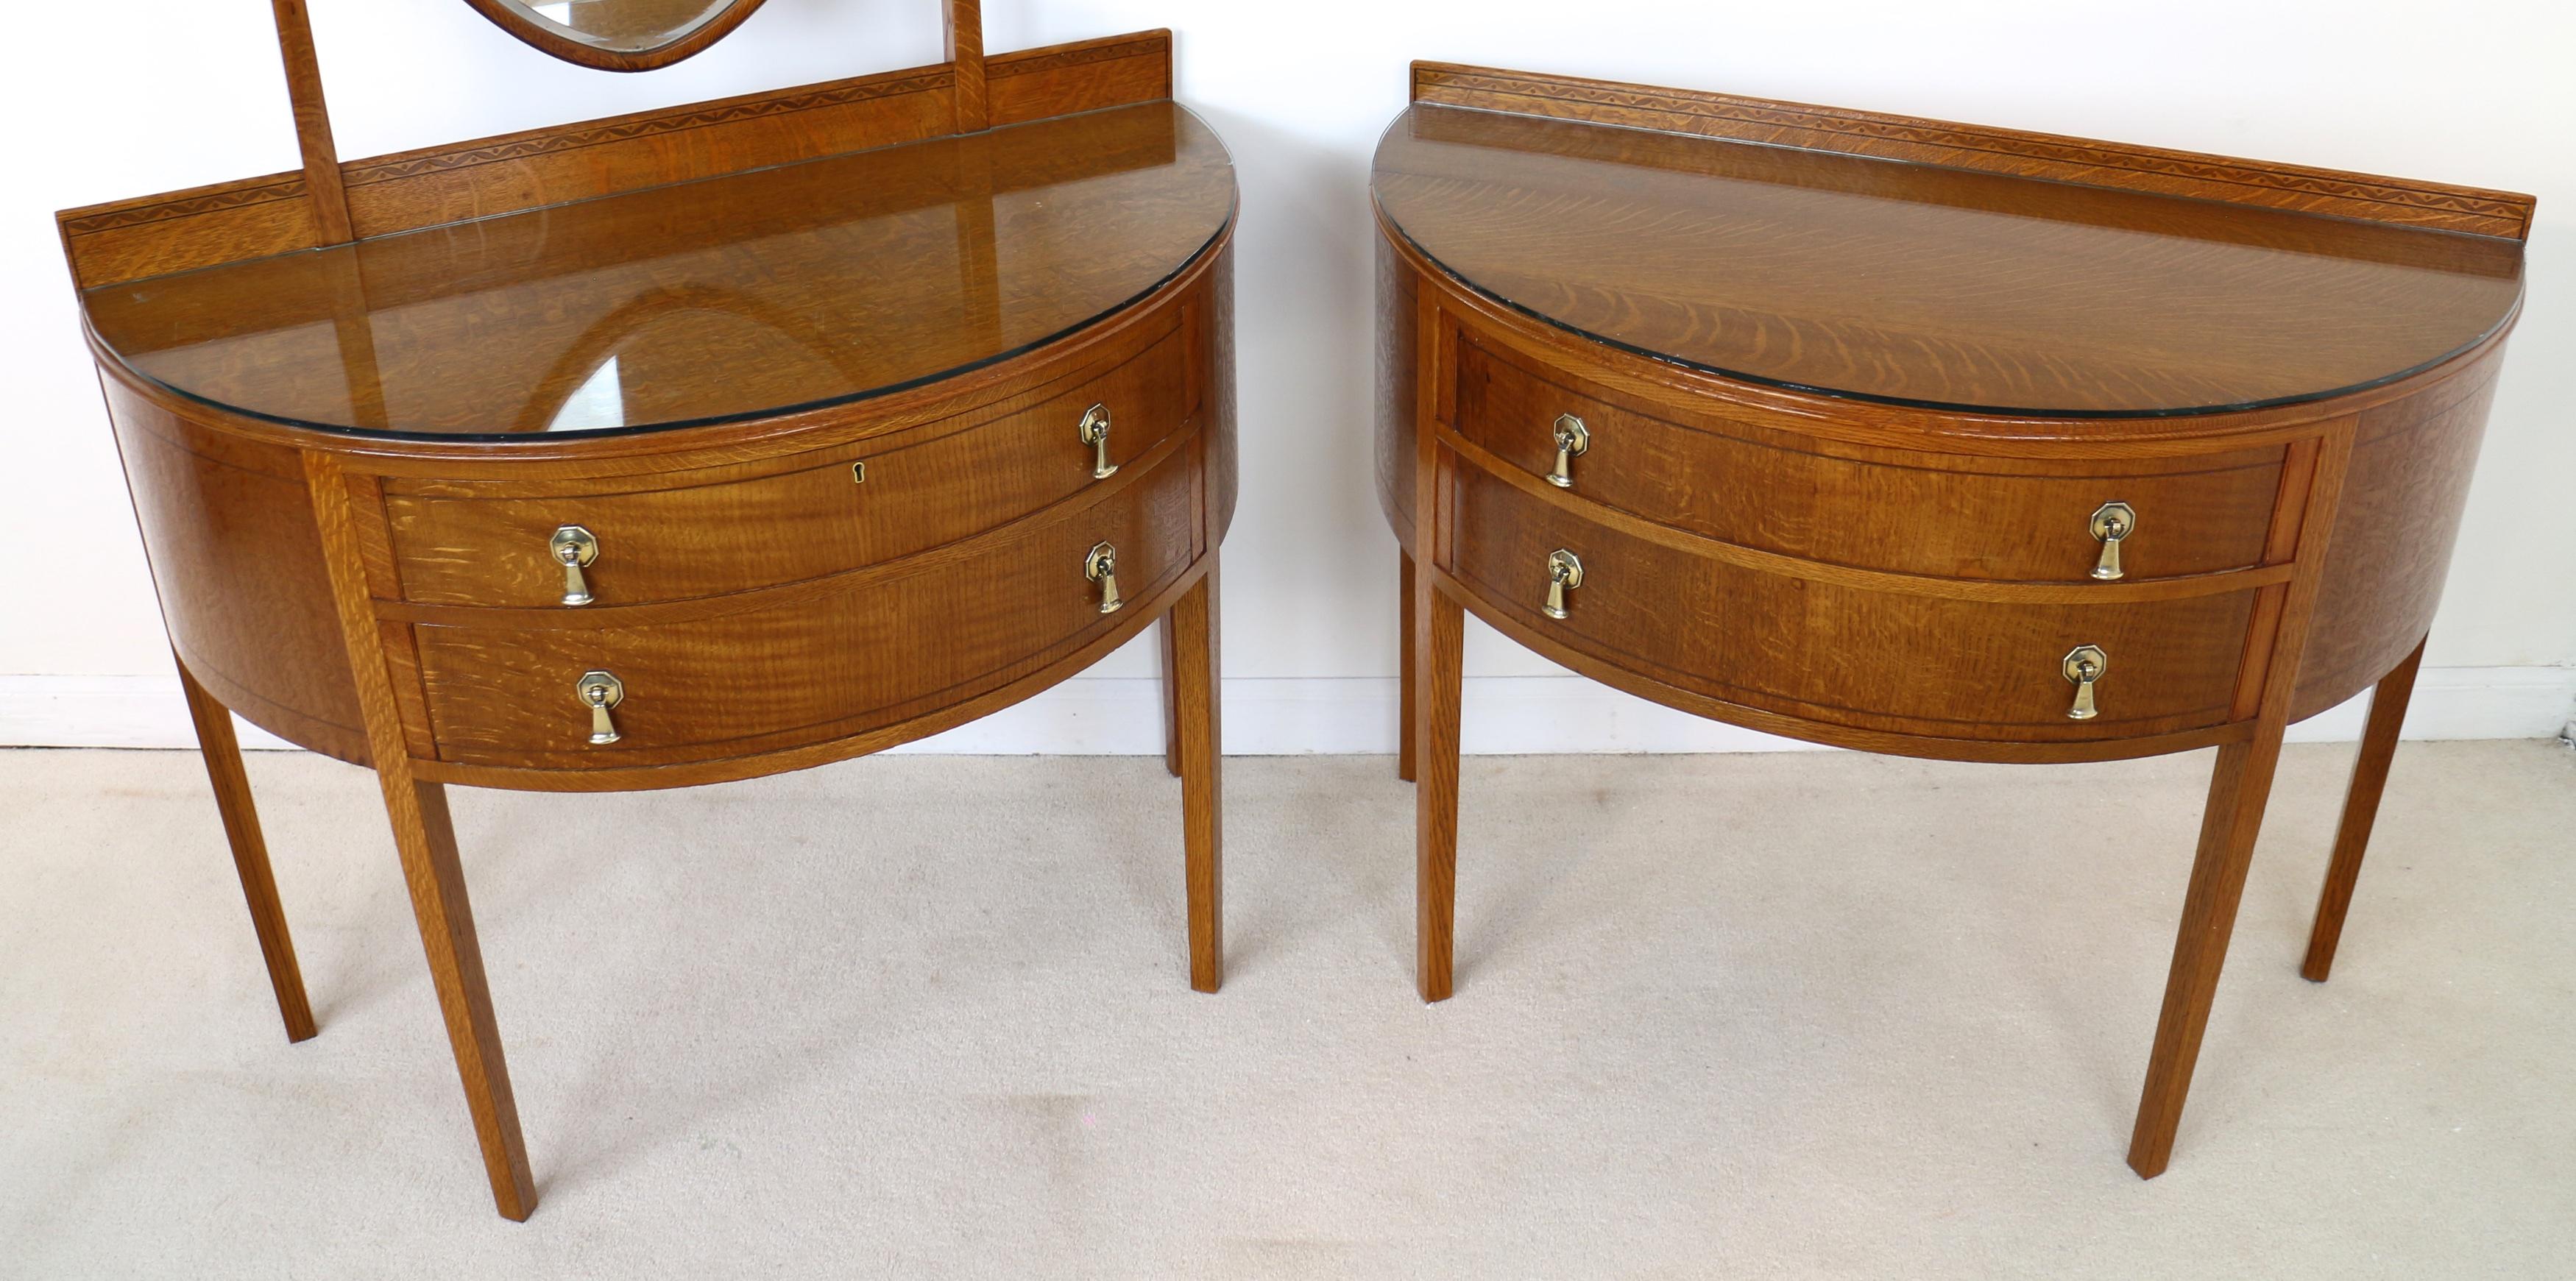 Pair of Antique English Arts & Crafts Oak Inlaid Dressing Table Chests In Good Condition For Sale In Glasgow, GB